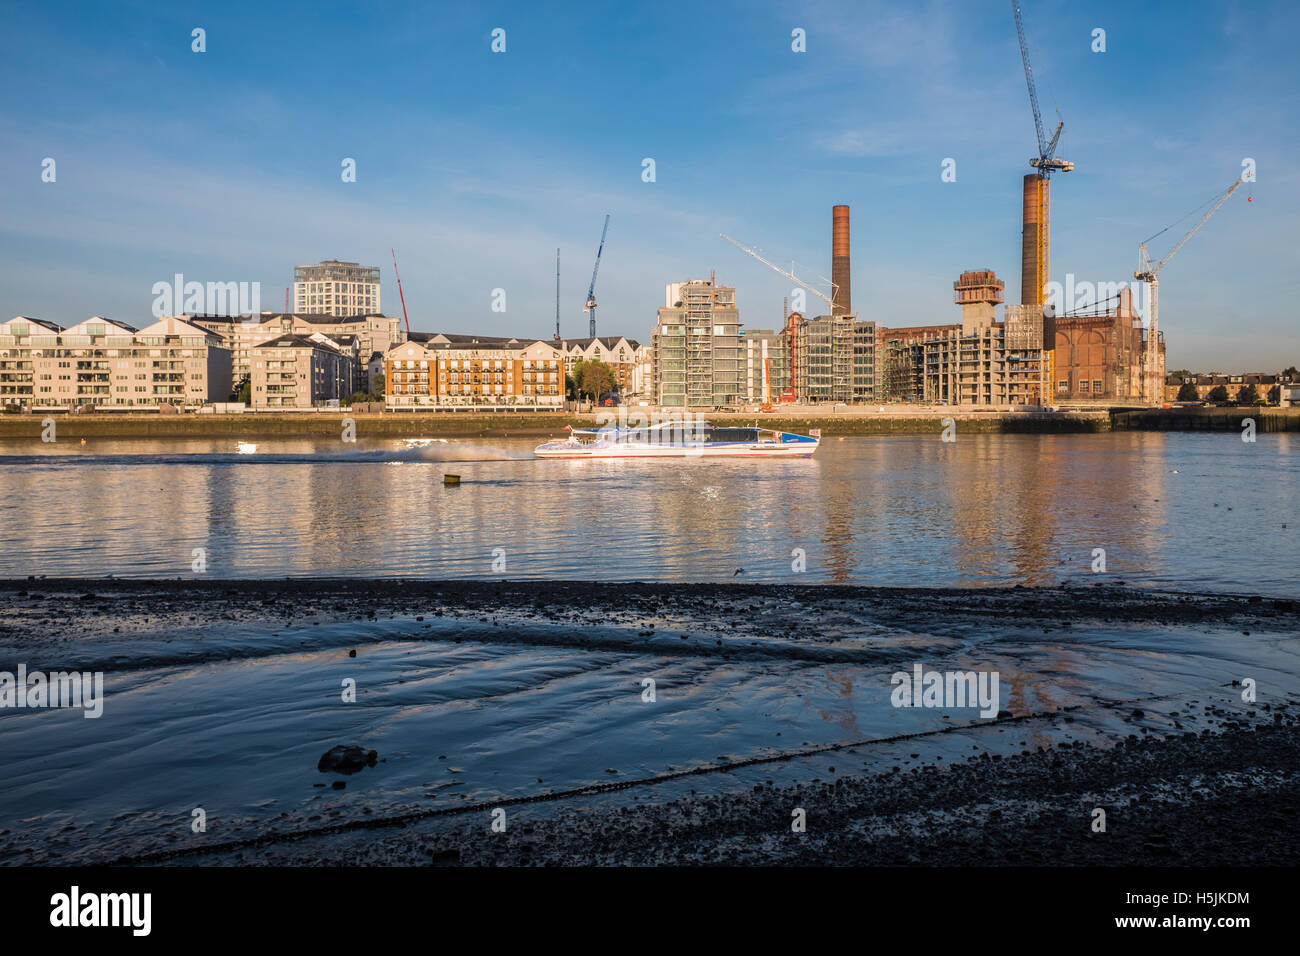 Chelsea Waterfront Stock Photos & Chelsea Waterfront Stock Images - Alamy